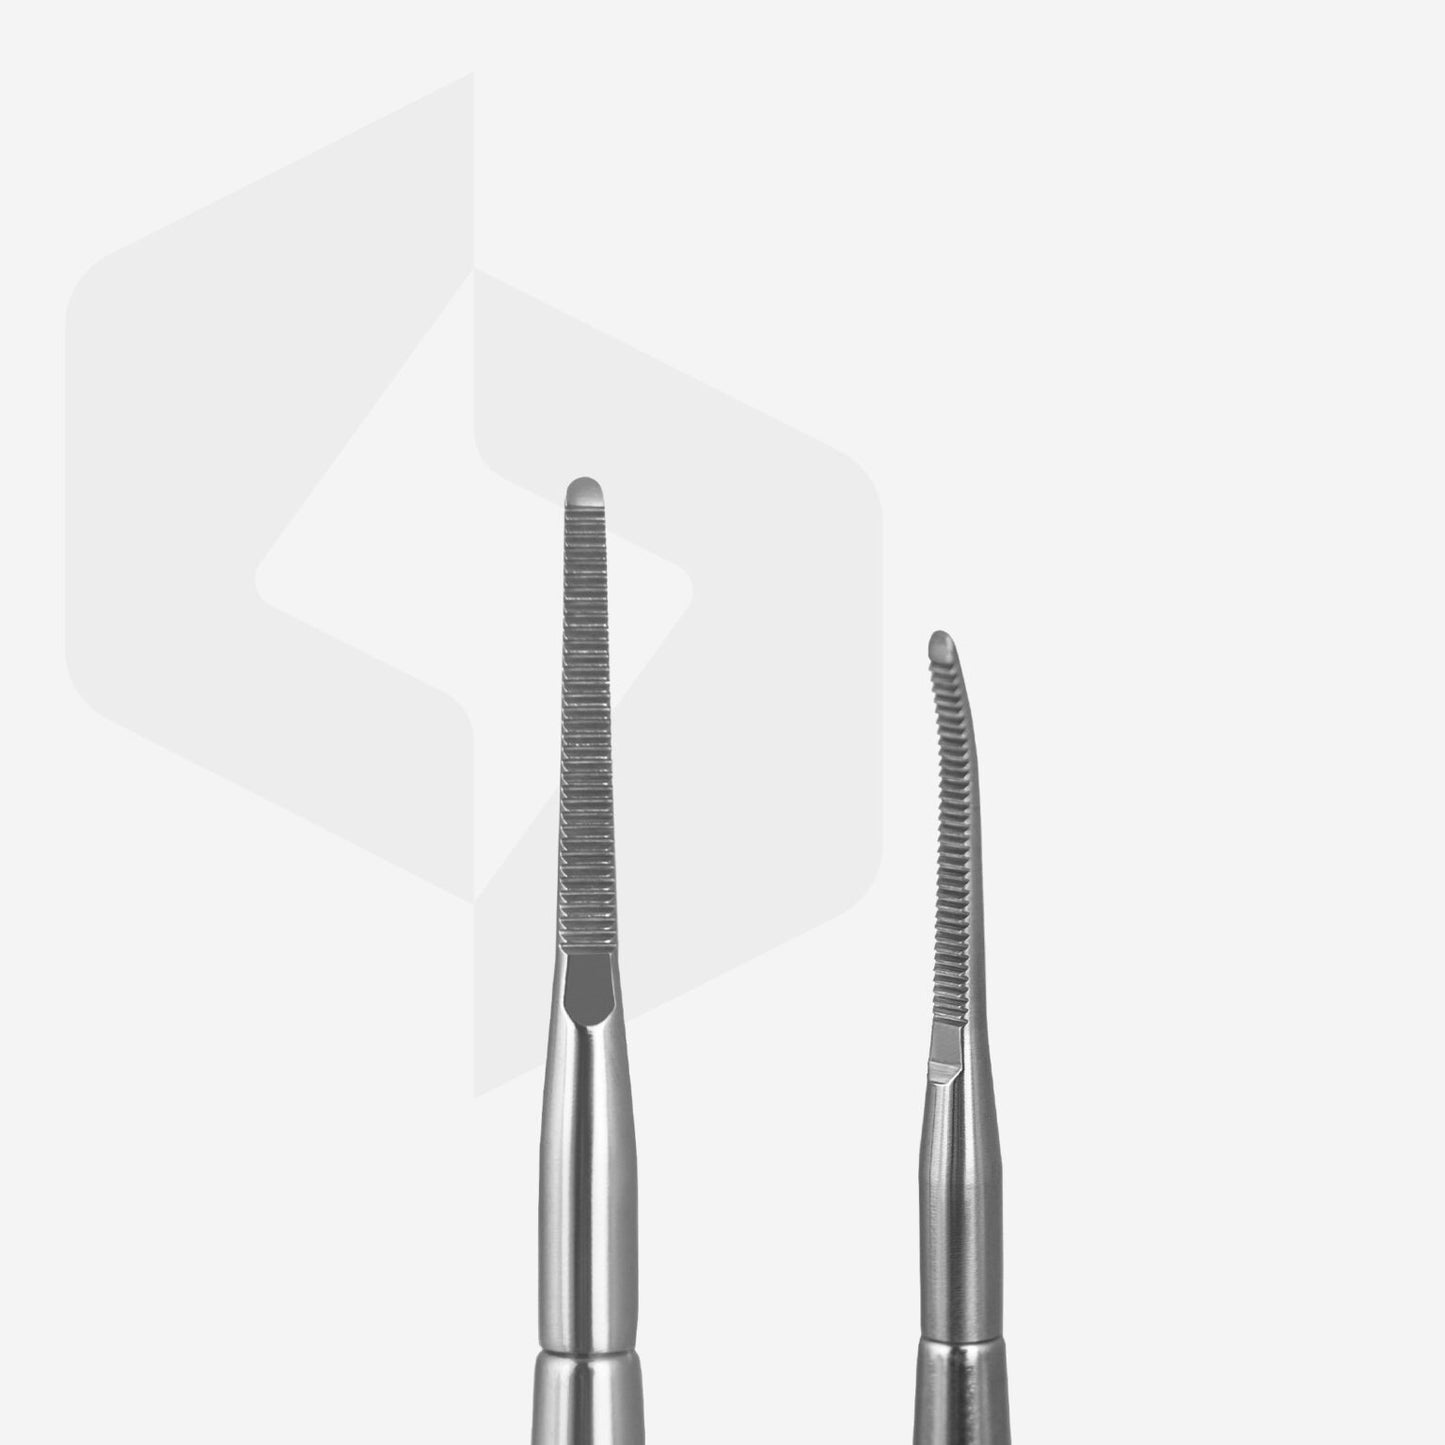 Pedicure tool EXPERT 60 TYPE 3 (ingrown toenail lifter and straight file)